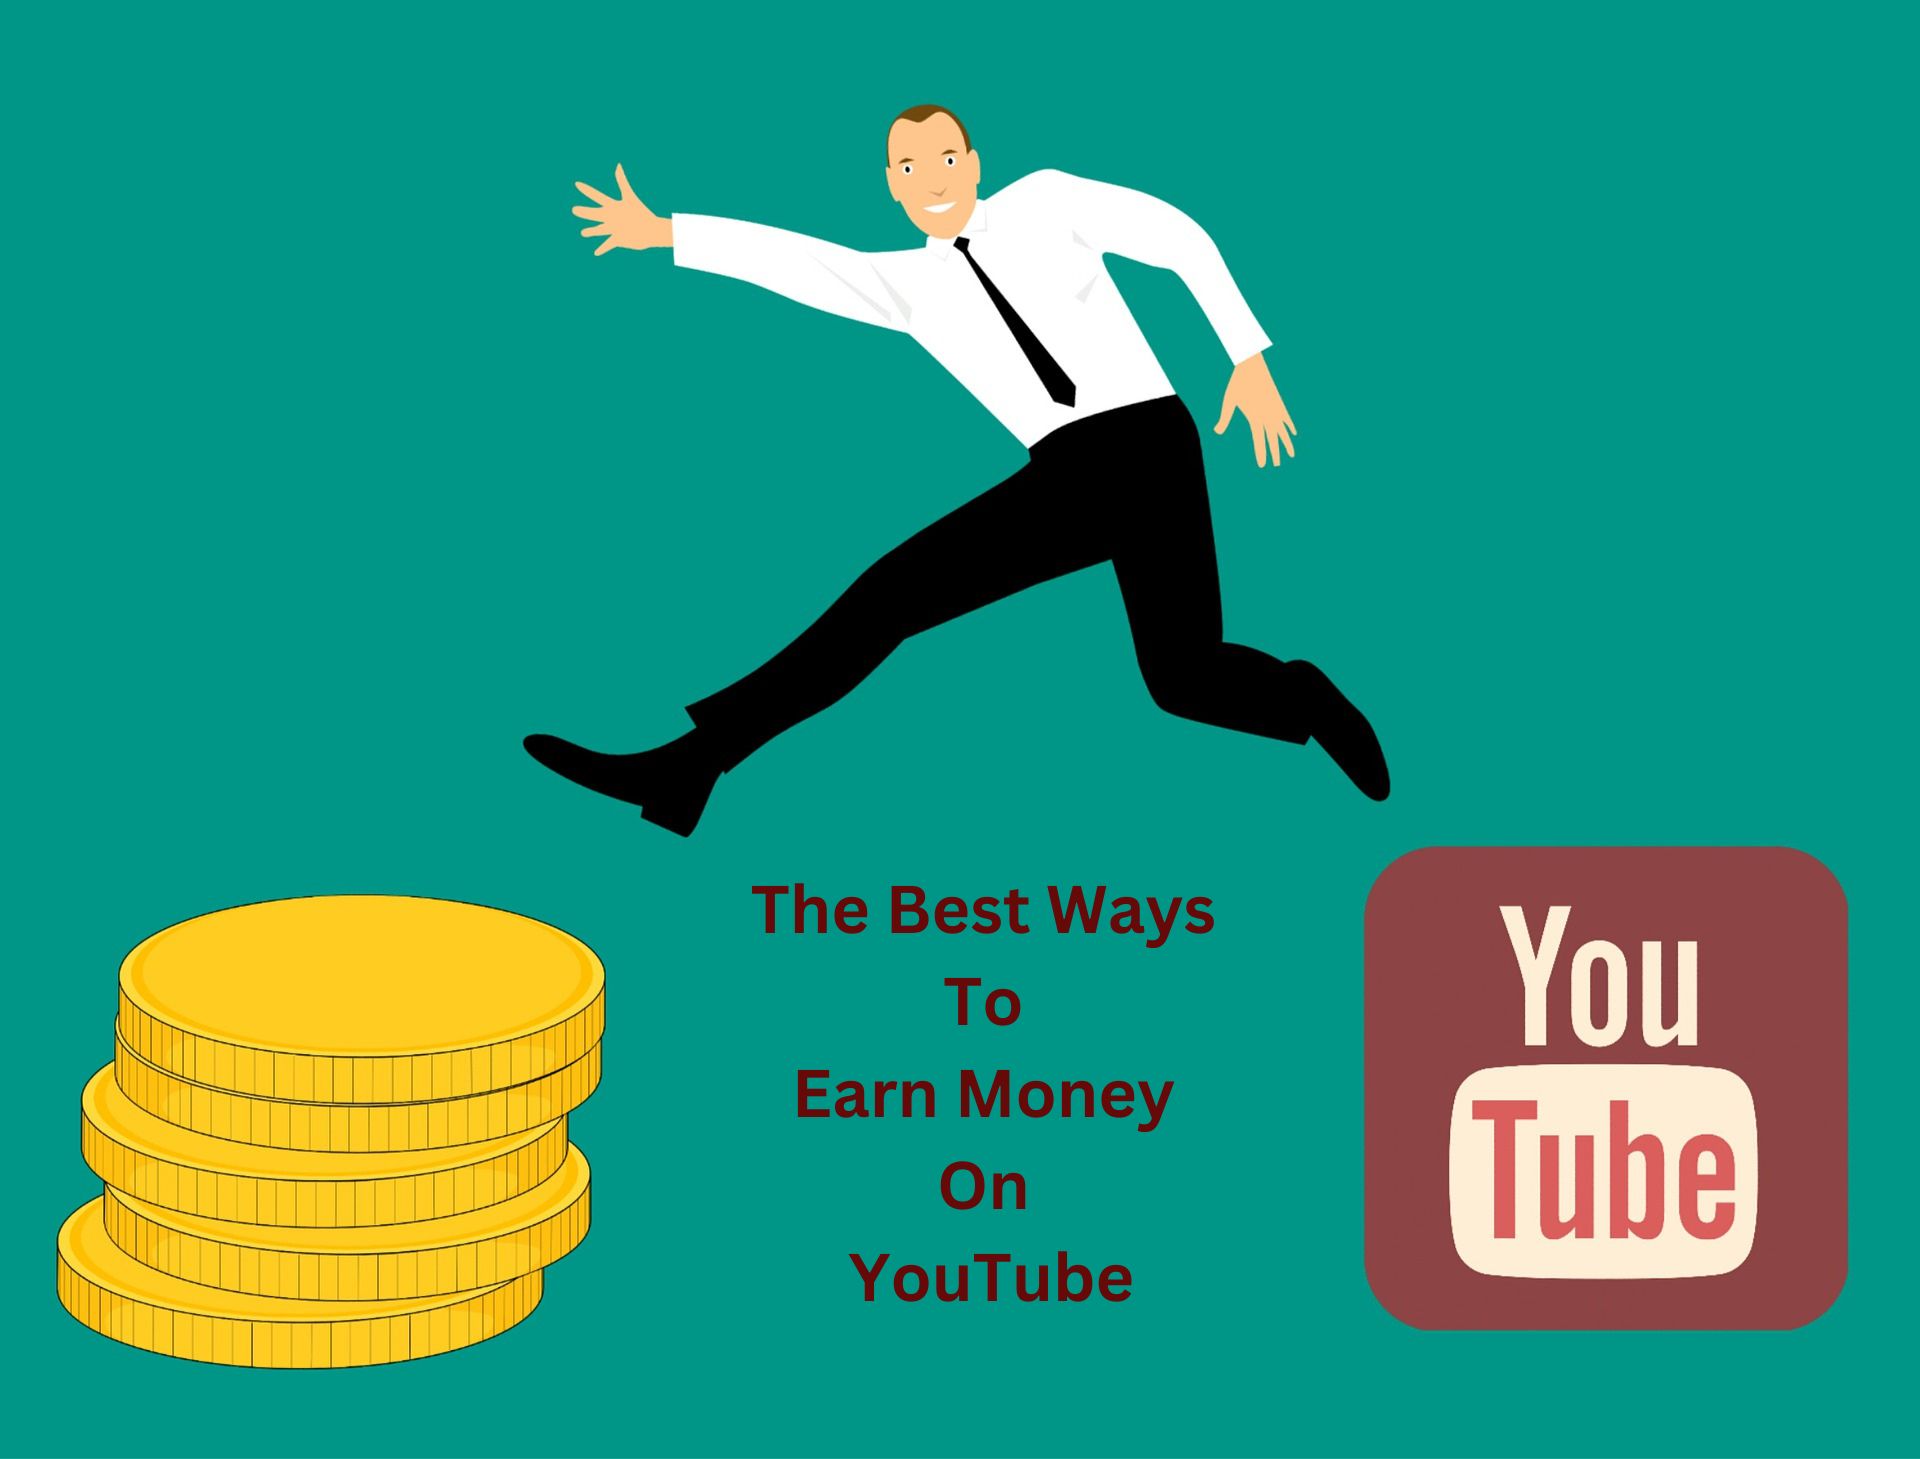 The best ways to earn money on YouTube